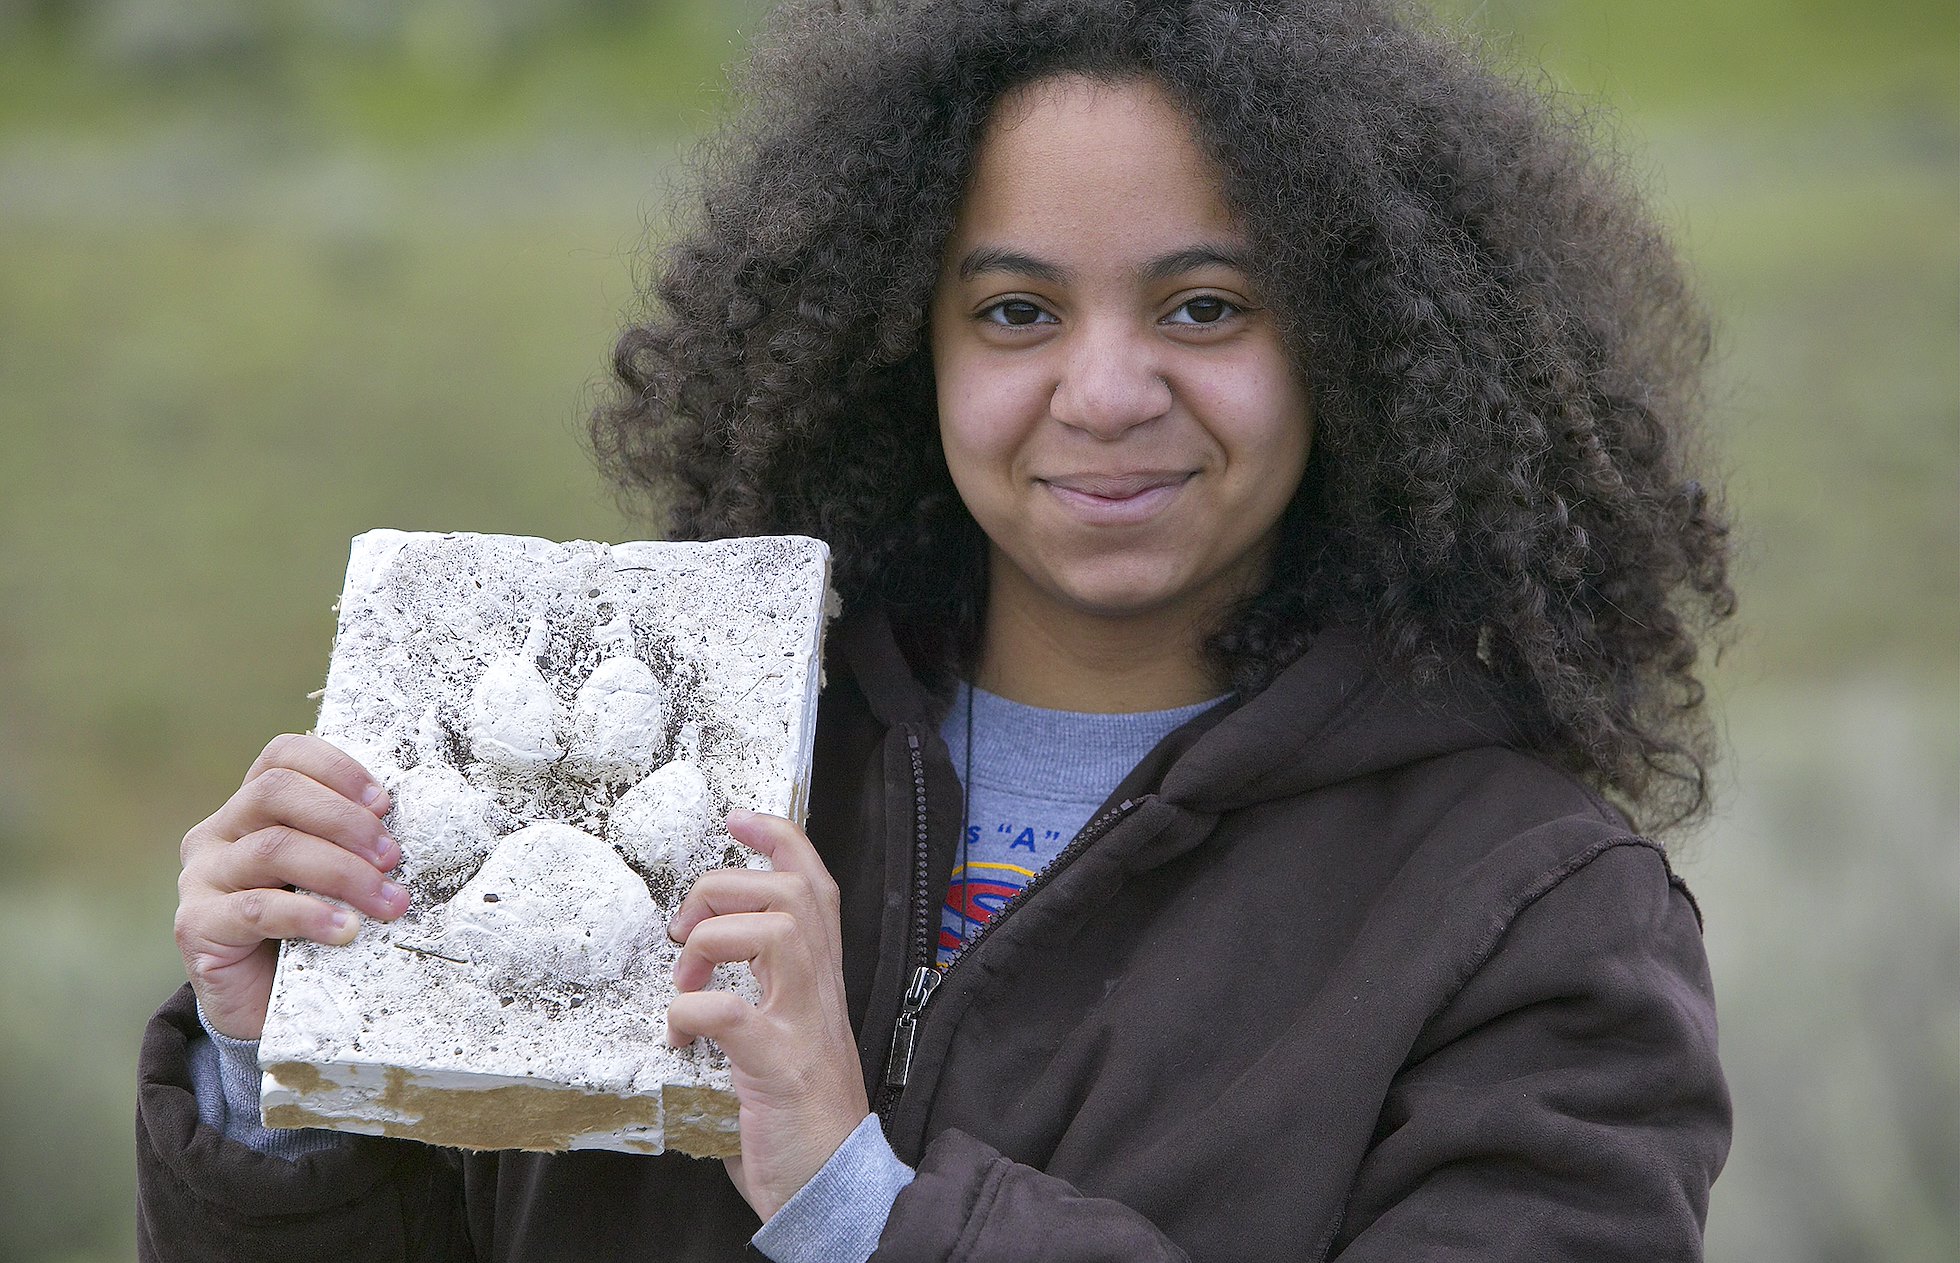 Young wildlife watcher holding up plaster cast of wolf footprint as part of education programme about wolf reintroduction  (wolf reintroduction in 1995 has boosted eco-tourism), Yellowstone National Park, USA